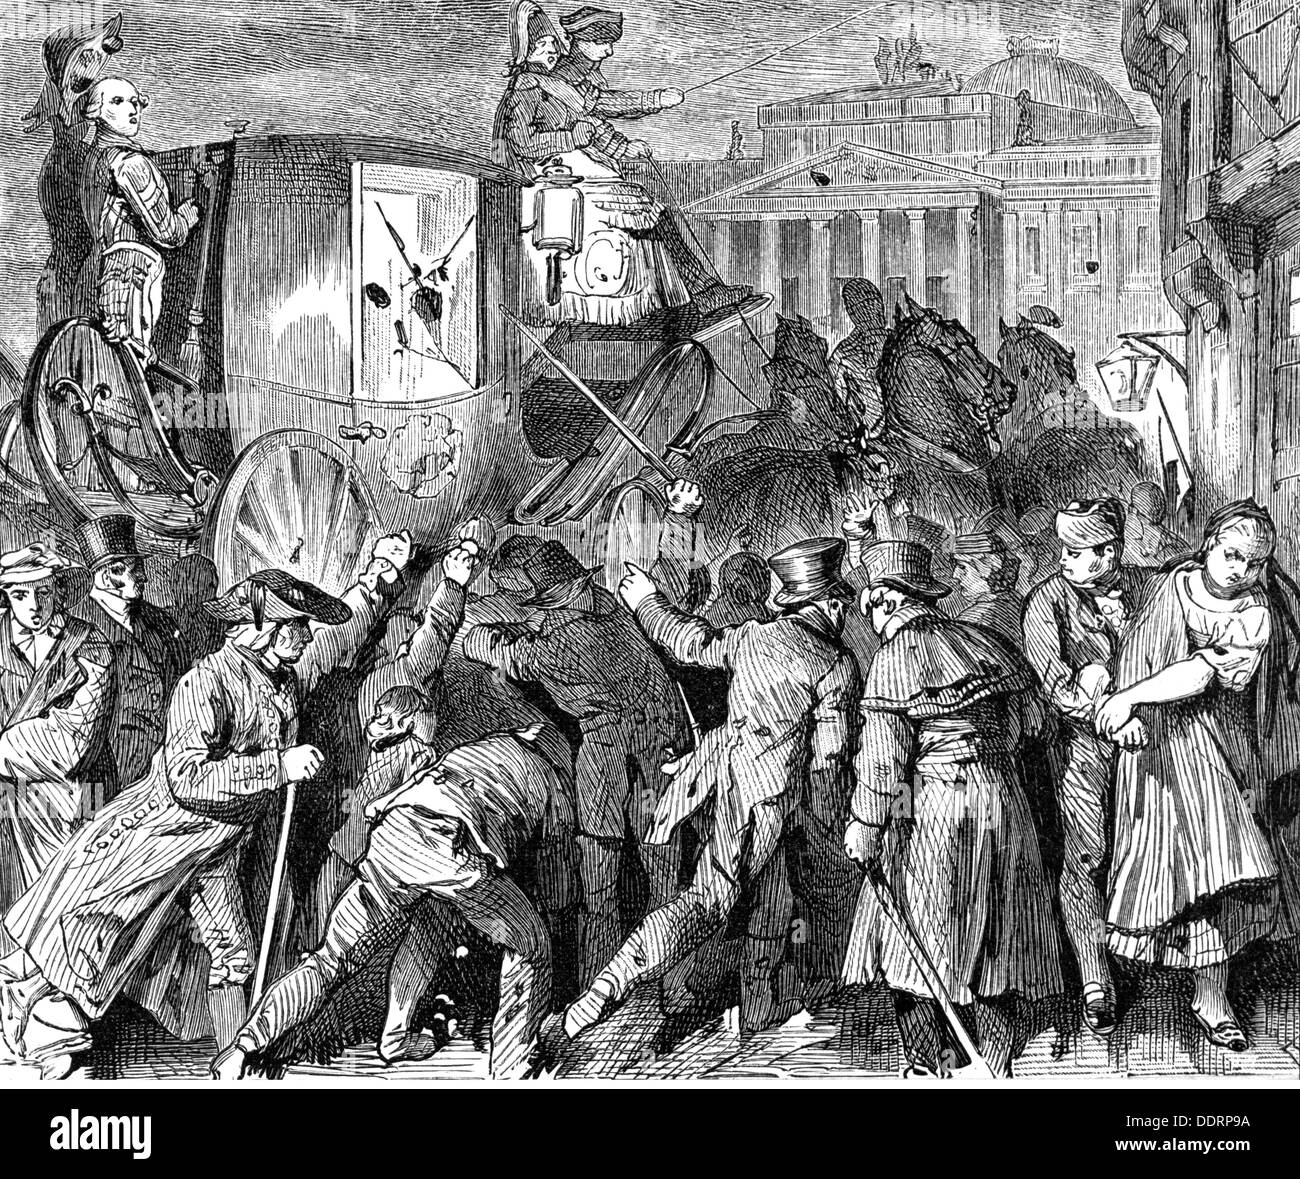 Revolution 1830,Germany,uprising in Brunswick,flight of Duke Charles II,6.9.1830,contemporary wood engraving after drawing by Ludwig Burger,crowd,crowds,crowds of people,insurgent,insurgents,rebel,rebels,revolter,revolters,unrest,disturbances,create a disturbance,riot,riots,insurrection,revolt,July revolution,Duchy of Brunswick,German Confederation(1815-1866),Germanic Confederation,September,19th century,revolution,revolutions,uprising,rising,uprisings,historic,historical,House of Welf,Guelph,Welf dynasty,Welfs,Karl,Additional-Rights-Clearences-Not Available Stock Photo